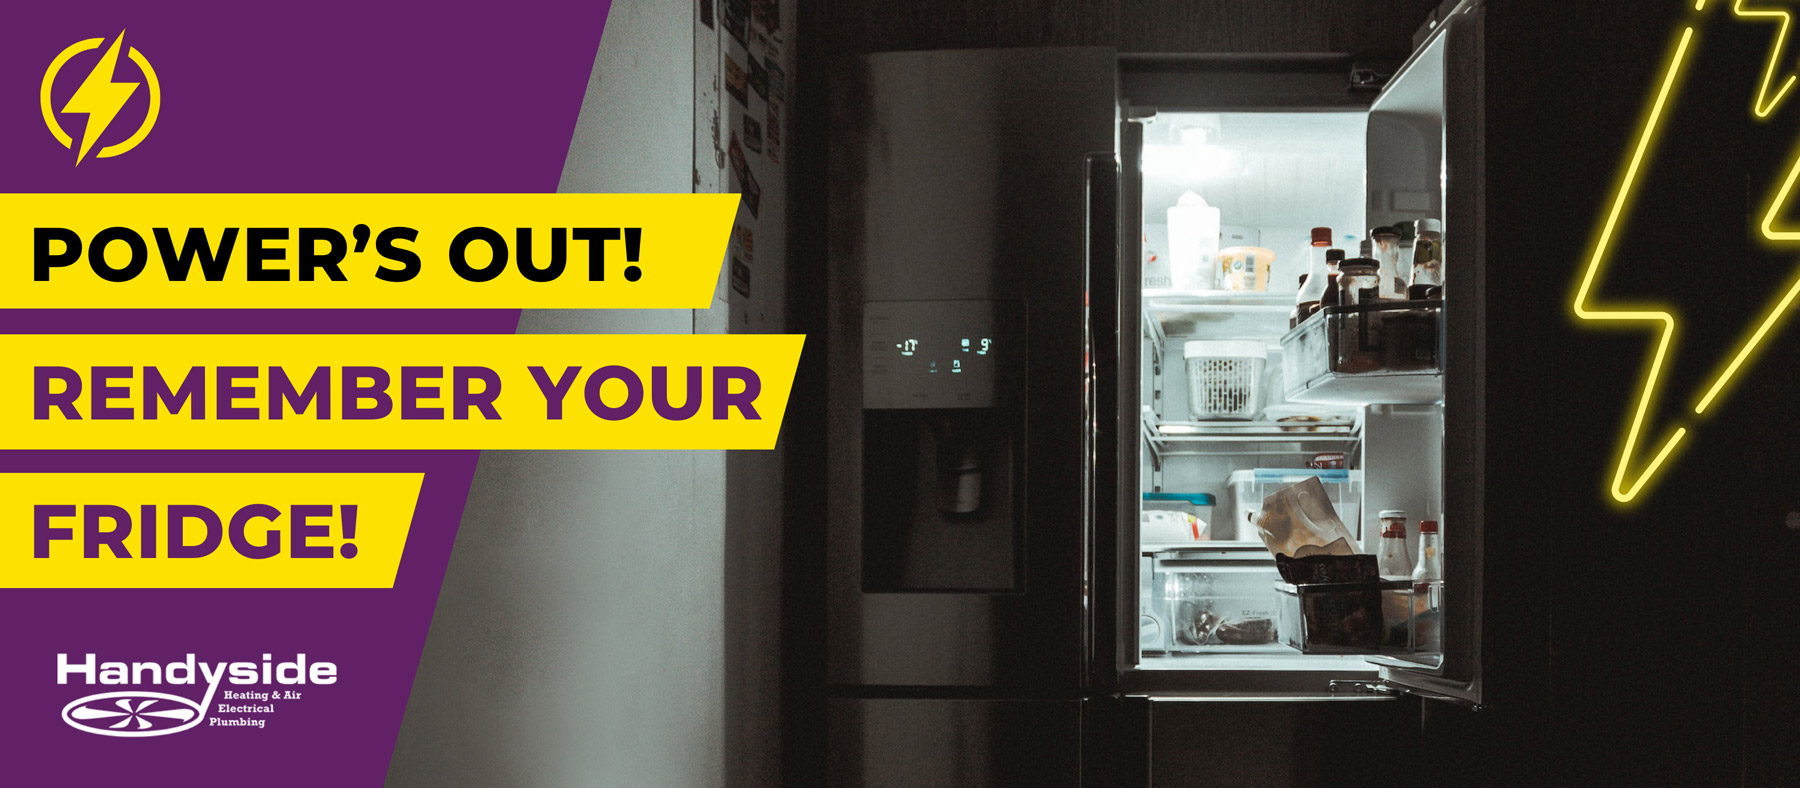 Power's out! Remember your fridge.